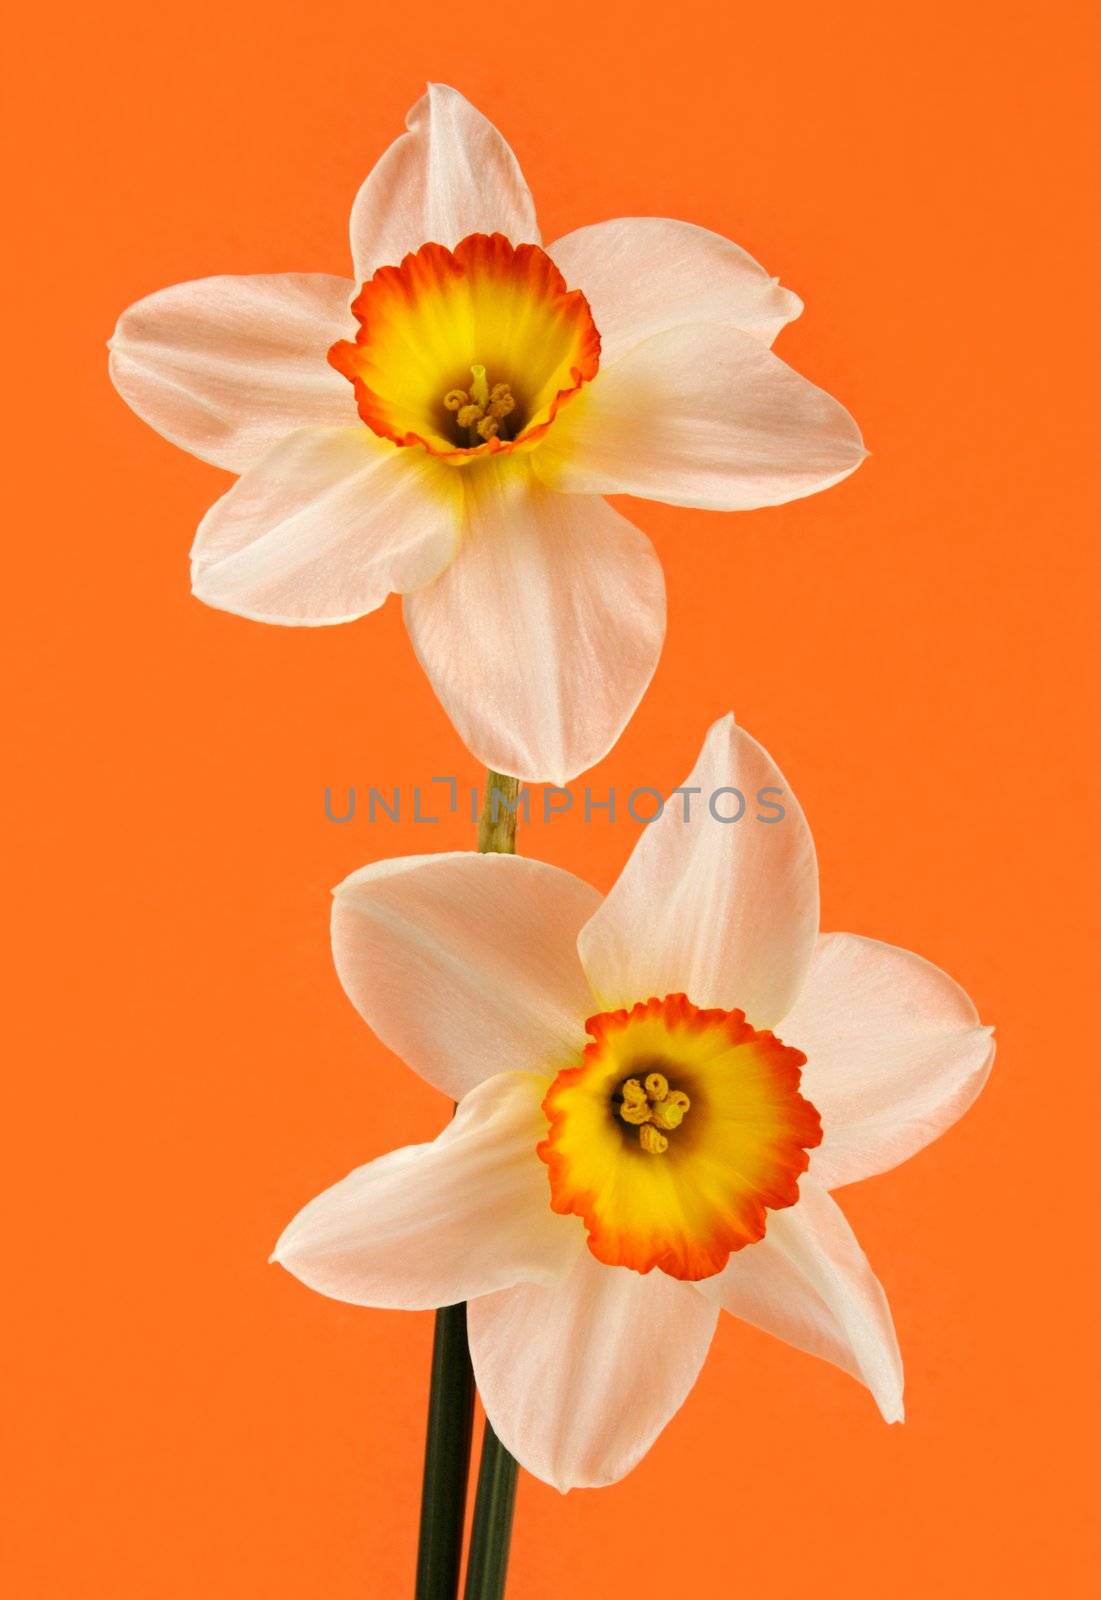 white and yellow Jonquil flower on orange background